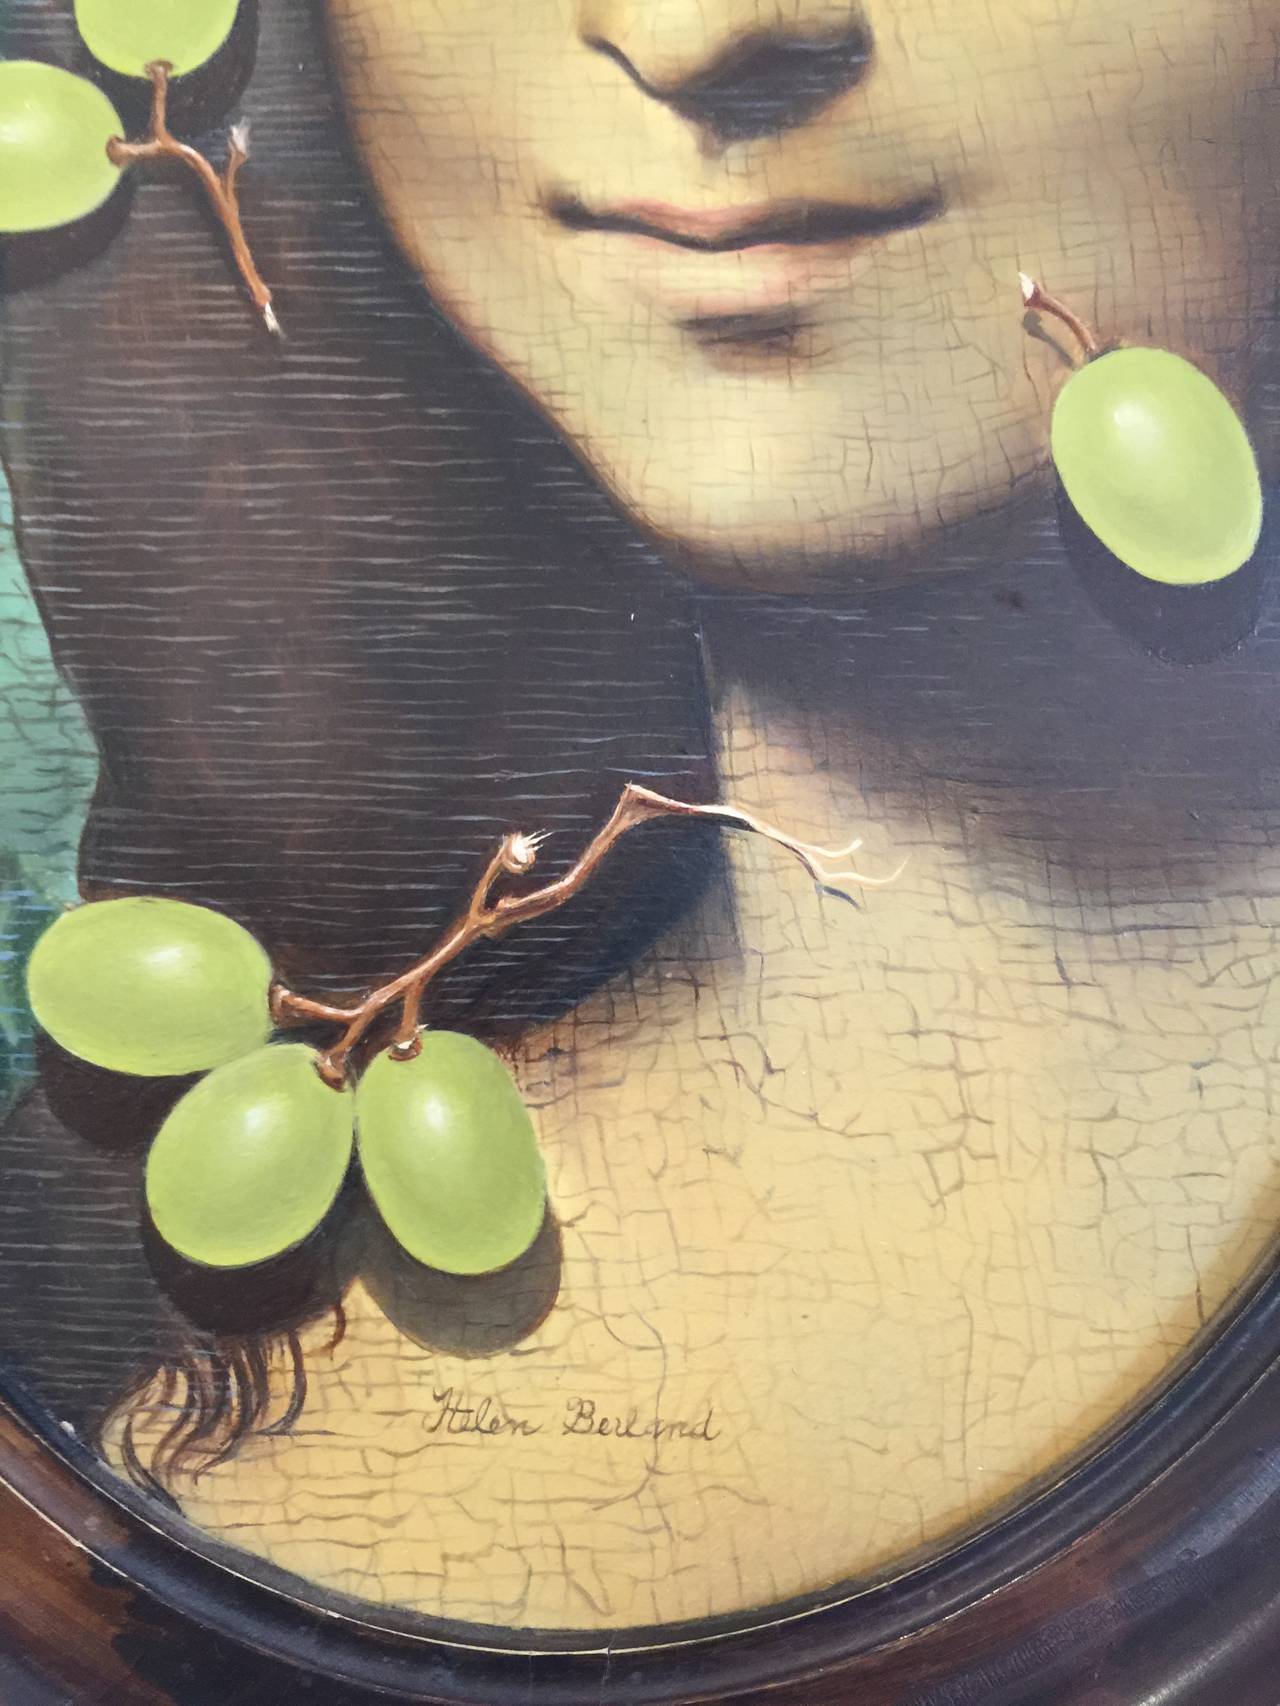 Whimsical play on DaVinci's Mona Lisa, this exquisite oil on panel with antique oval frame is by Helen Berland (signed).